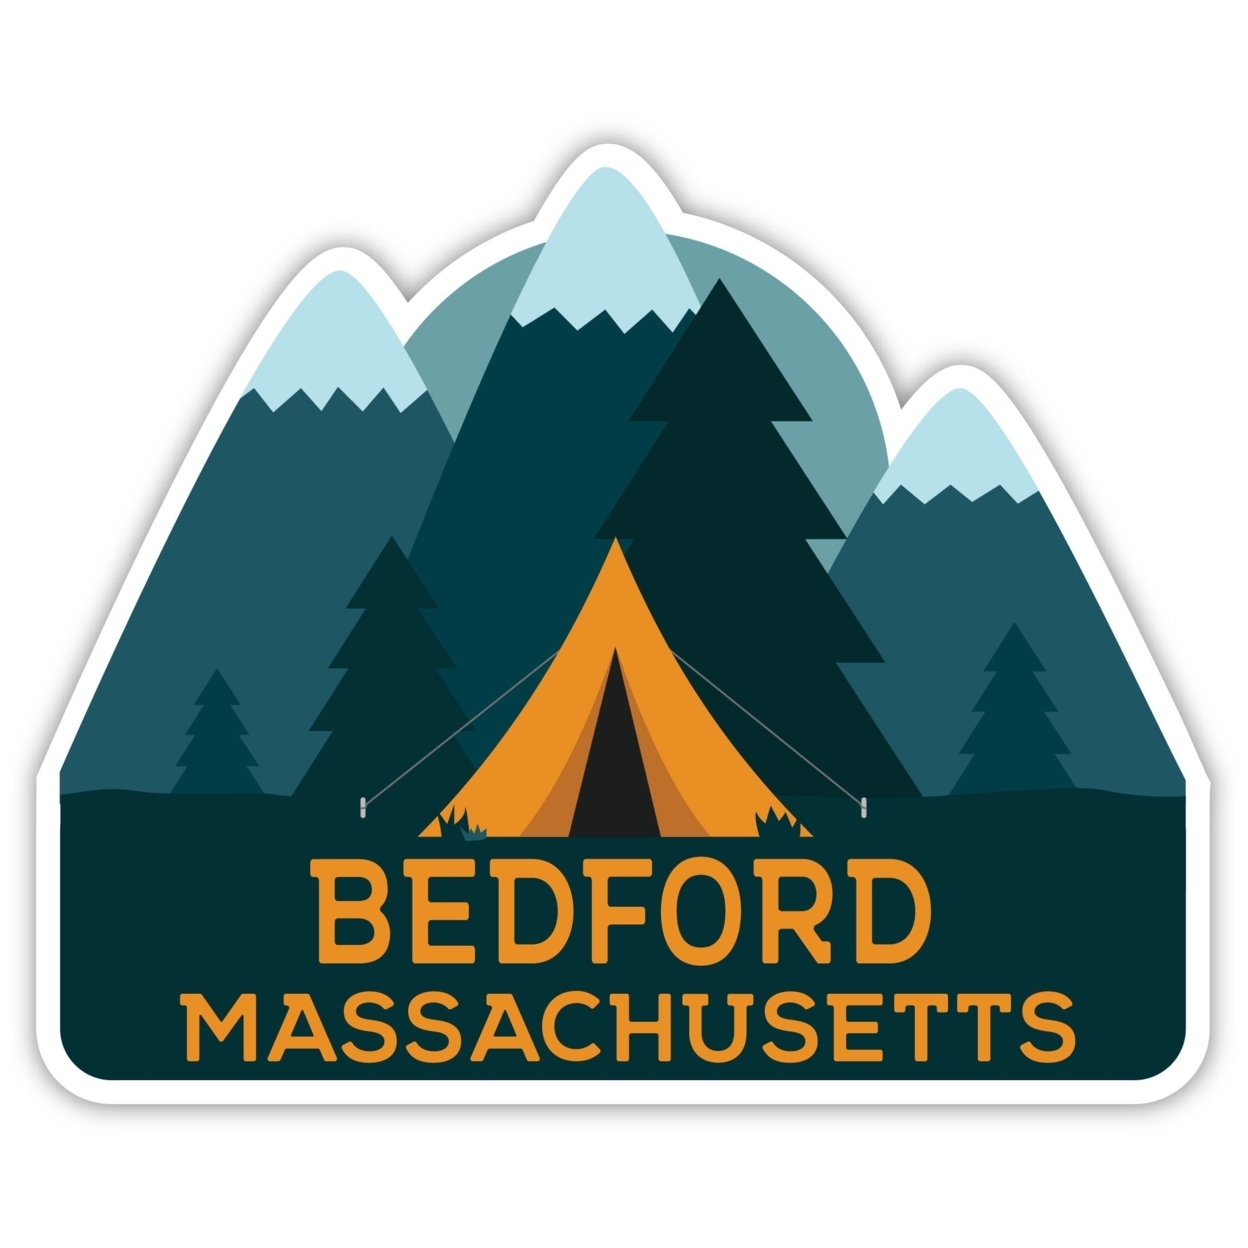 Bedford Massachusetts Souvenir Decorative Stickers (Choose Theme And Size) - 4-Pack, 2-Inch, Tent